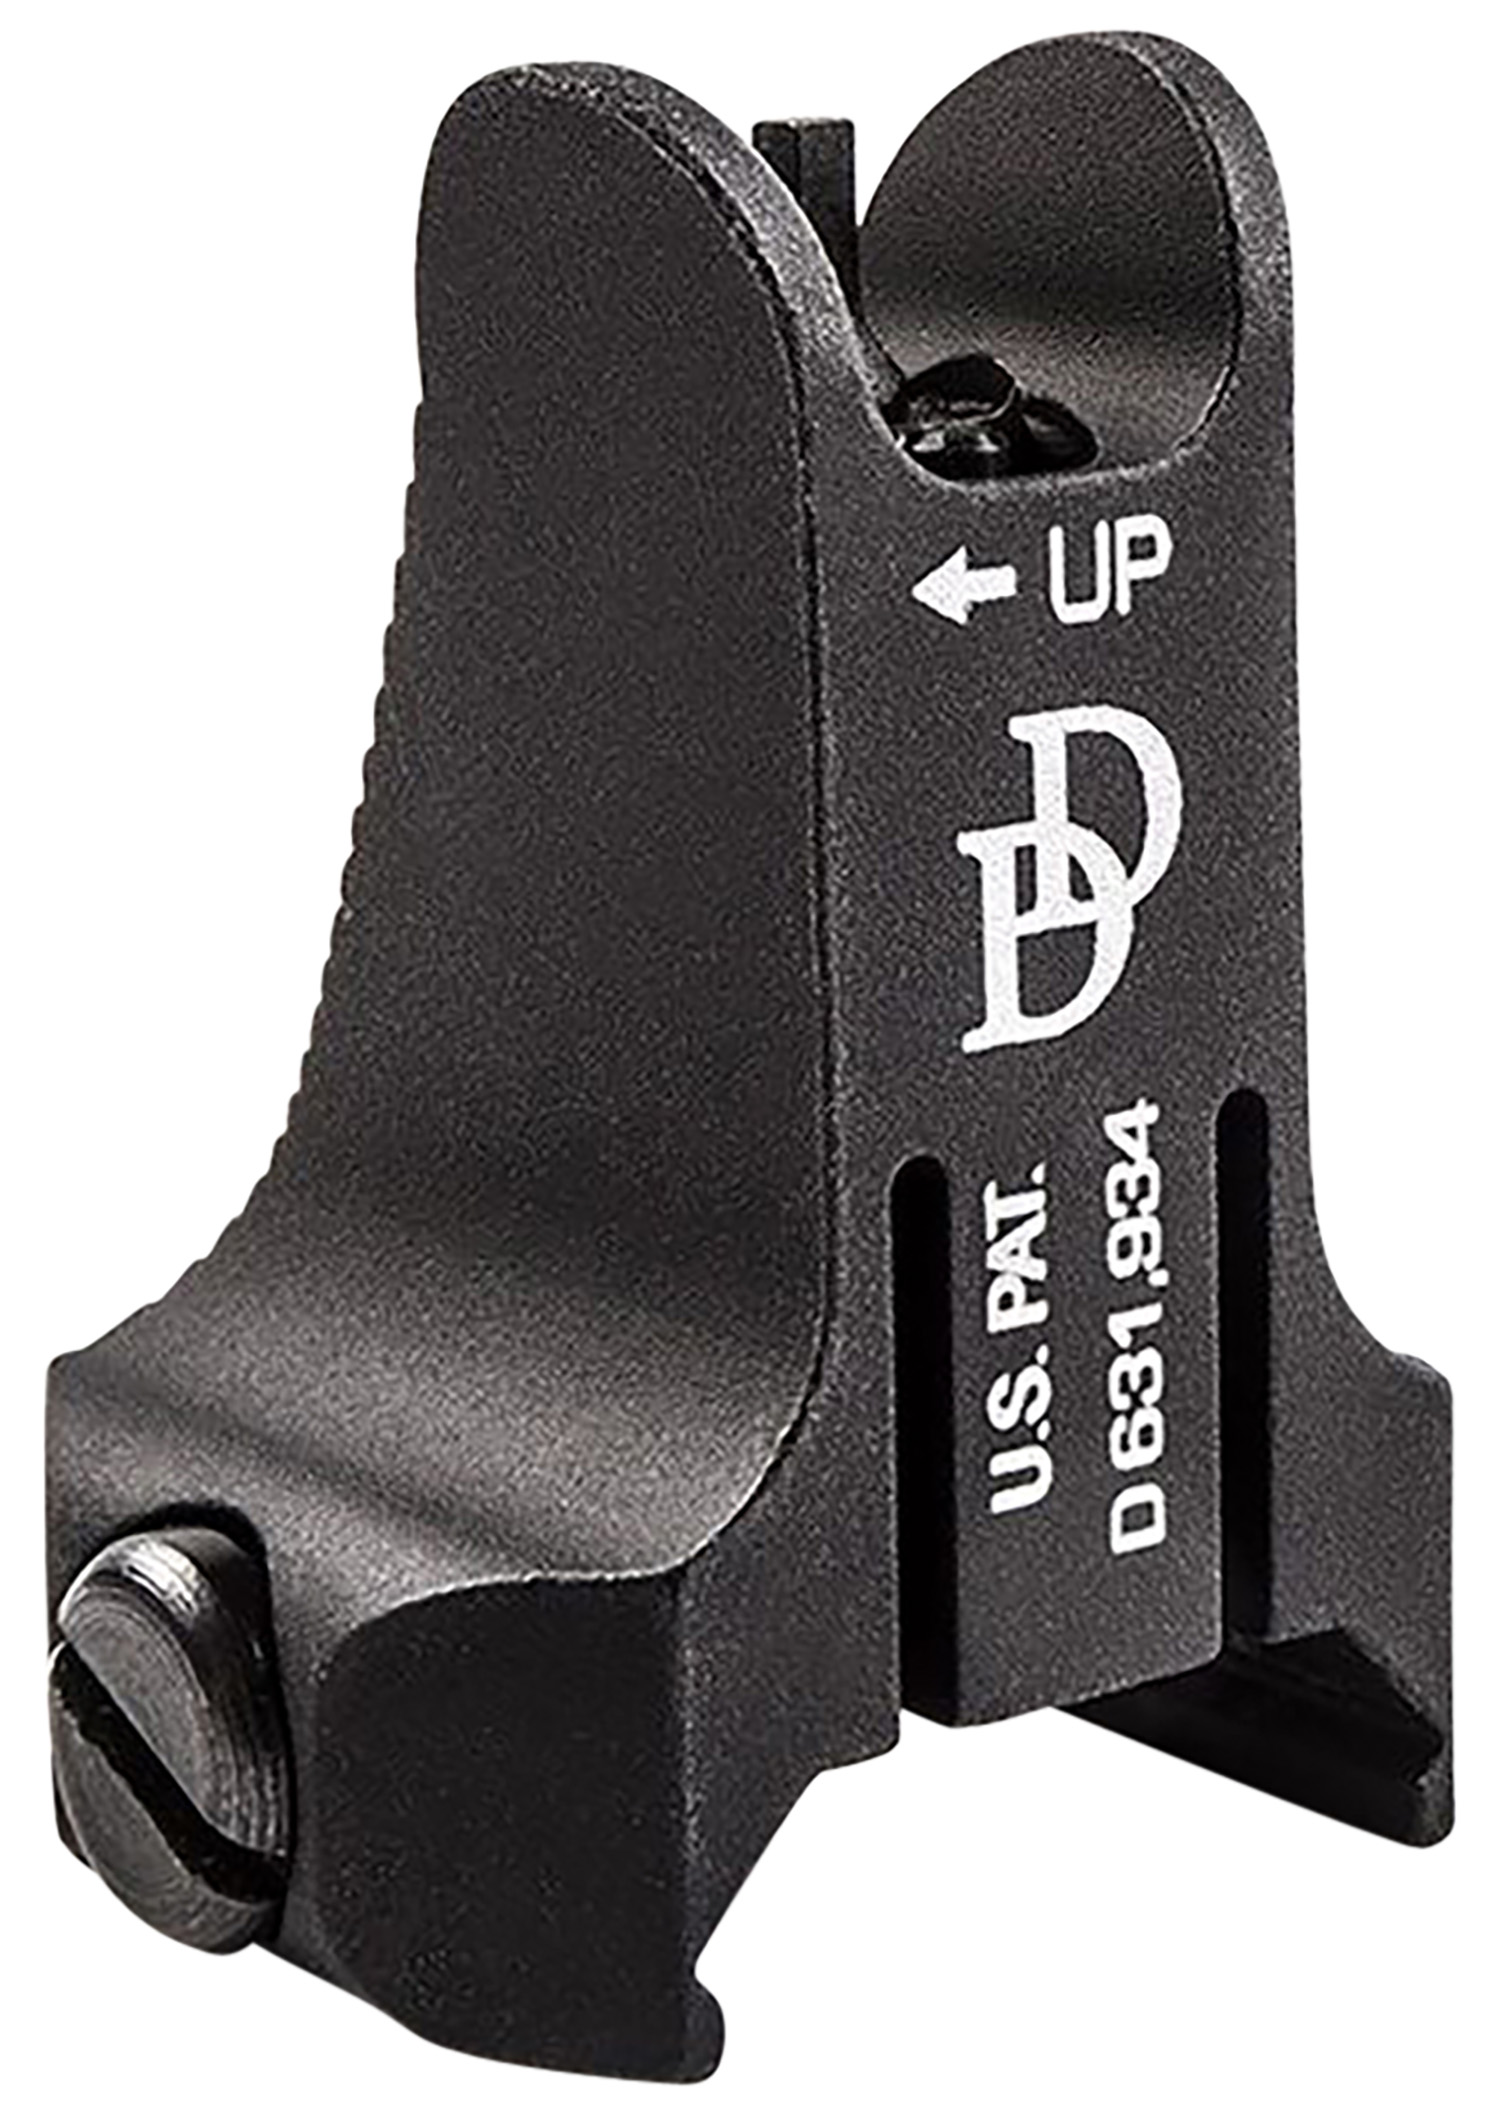 Daniel Defense  Rock & Lock Front Sight made of 6061-T6 Aluminum with Black Finish & 1-Piece Fixed Design for AR-Platform with Picatinny Rail